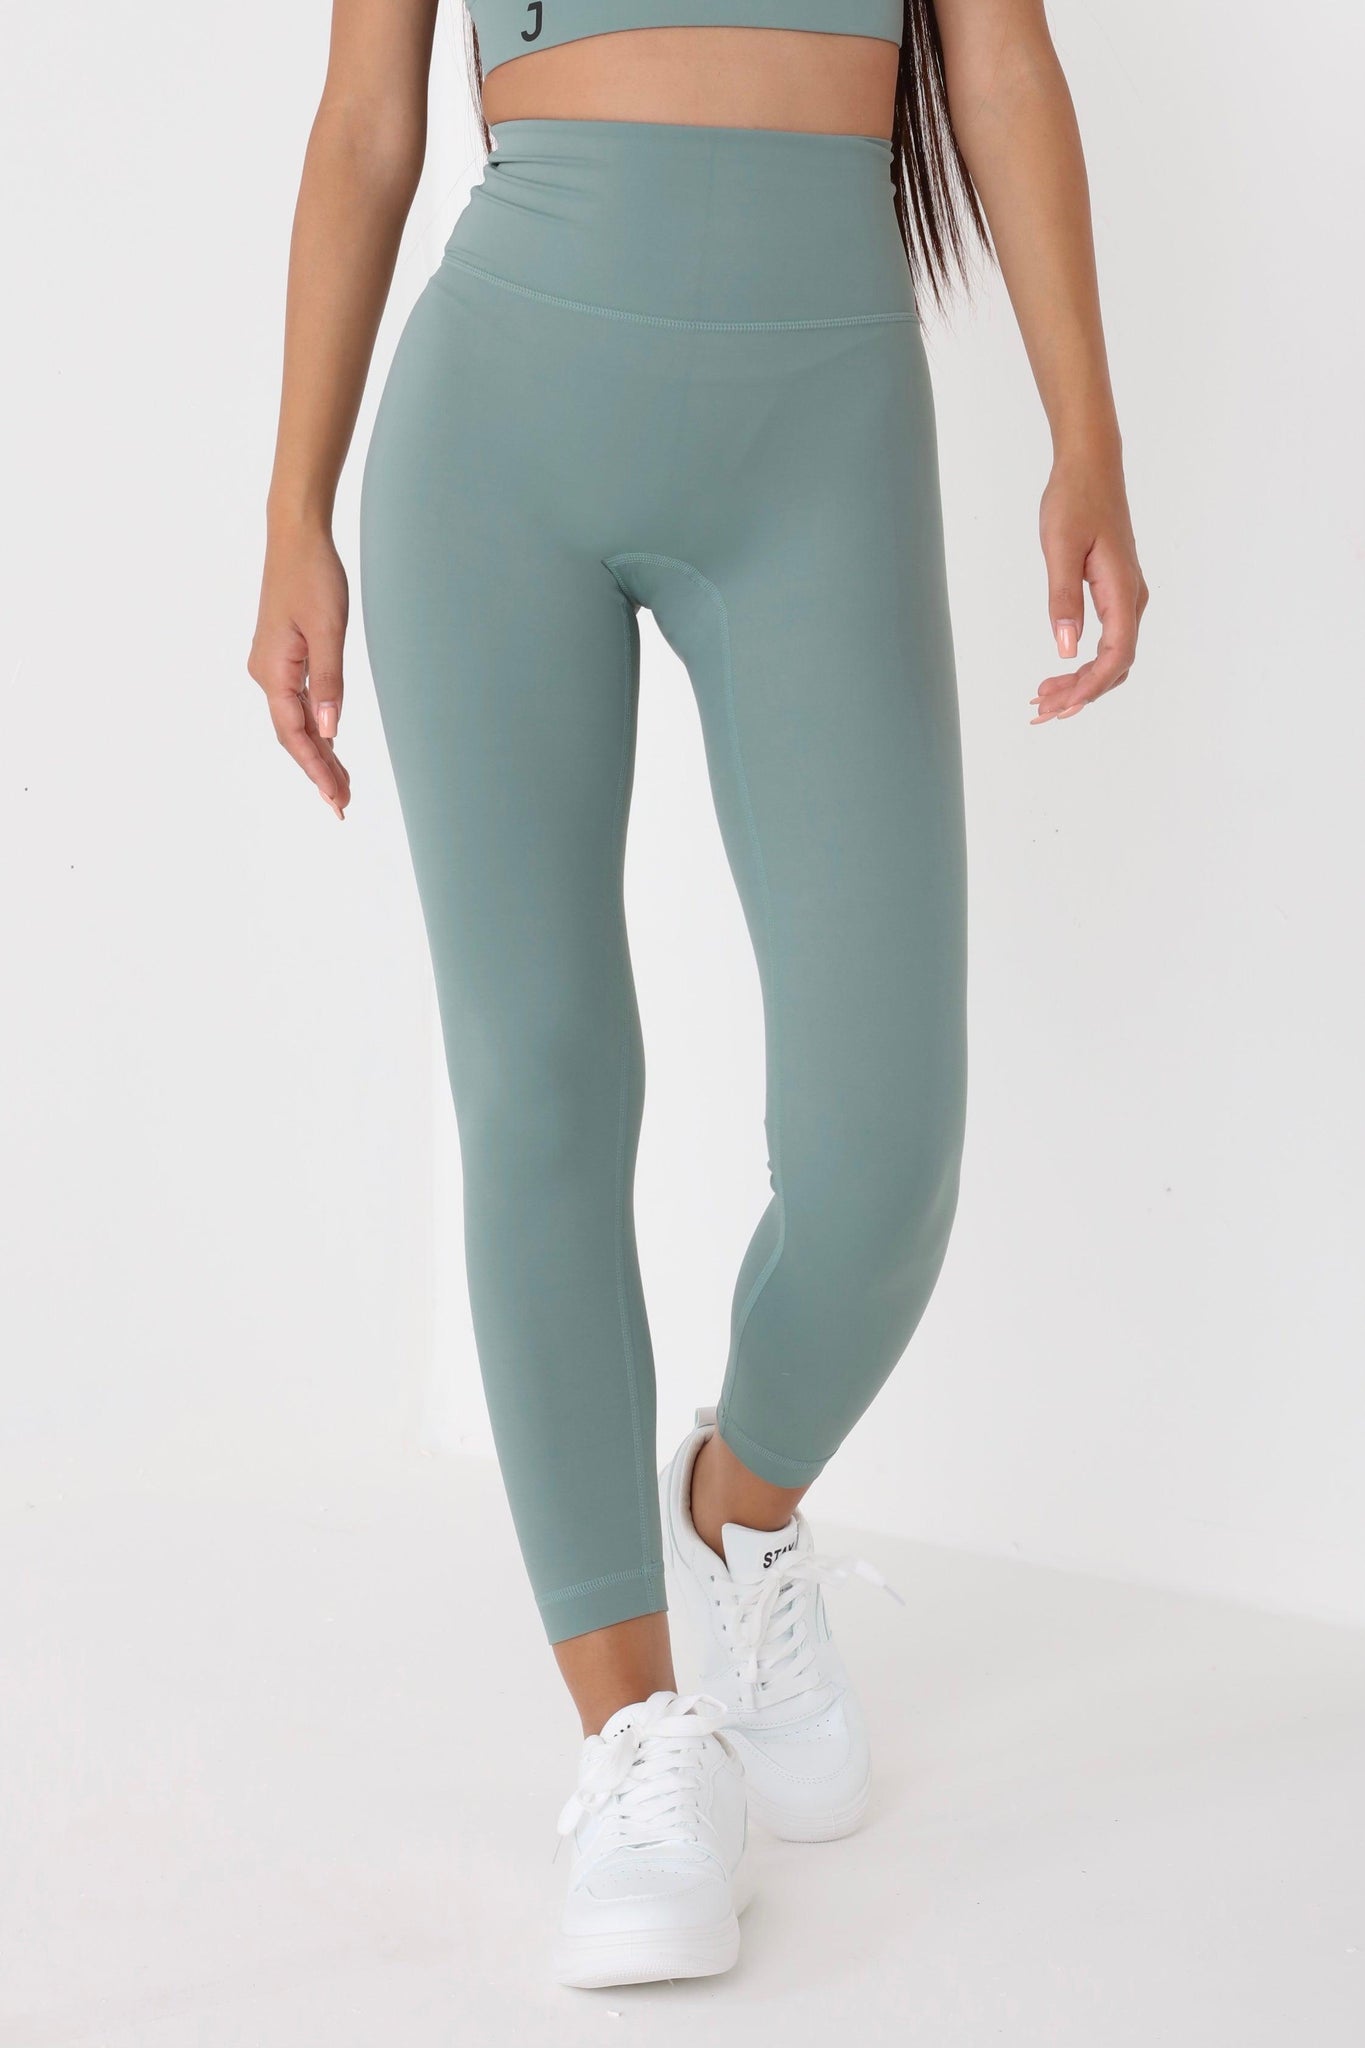 JUV fresh legging in green color, close up front view.